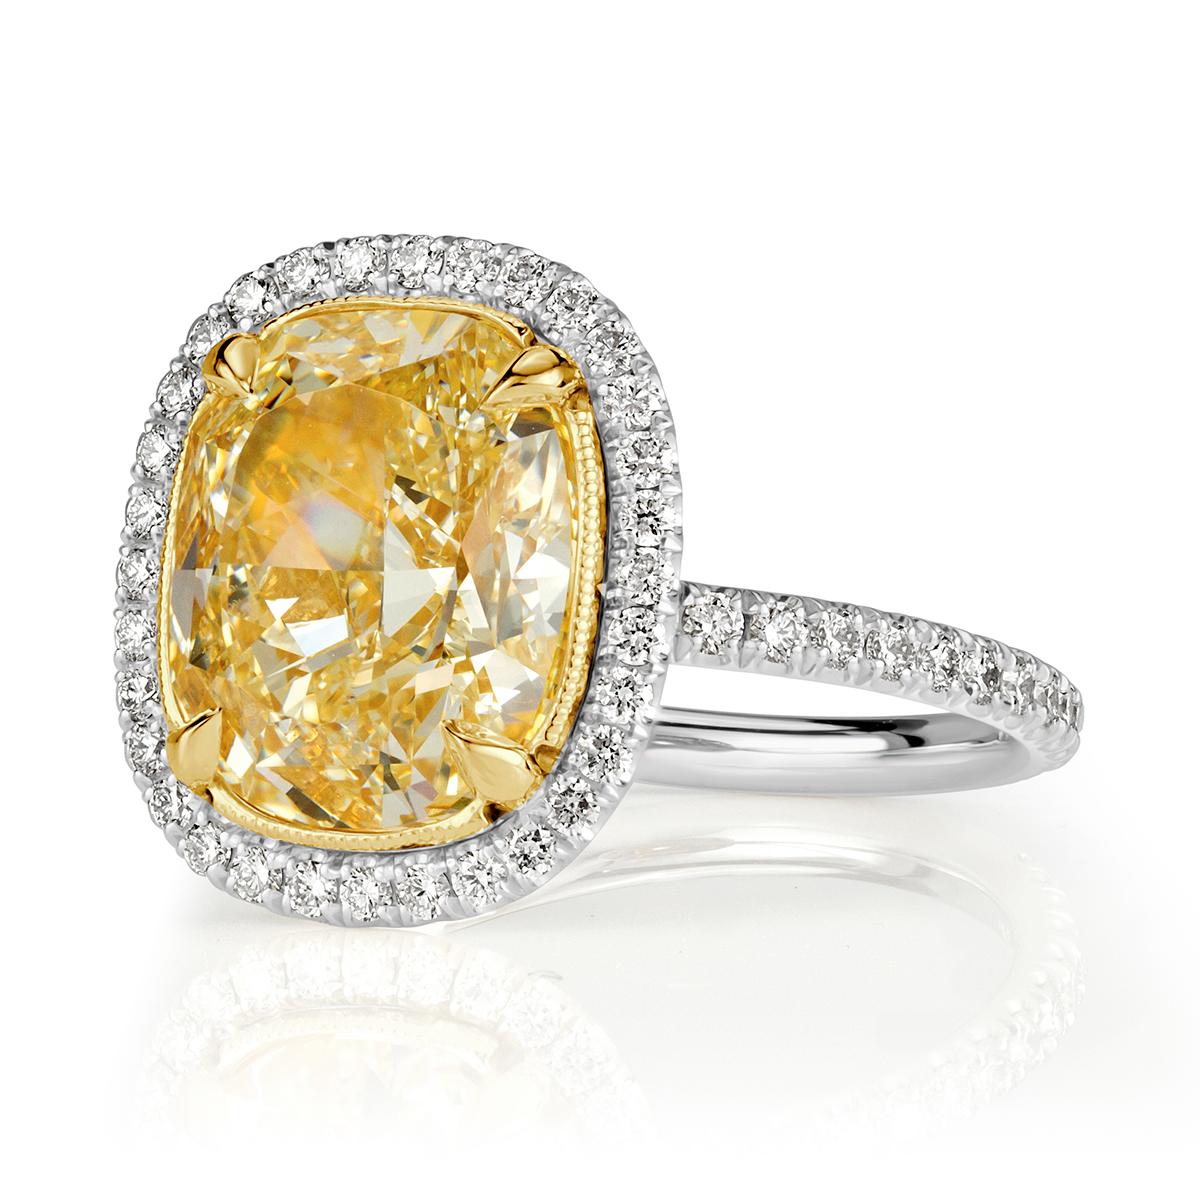 This one of a kind diamond engagement ring showcases a superb 4.52ct cushion cut center diamond, GIA certified at Z in color, VS1 in clarity. It faces up a rich yellow color and the cut is magnificent! It has incredible measurements of 10.01x8.32mm